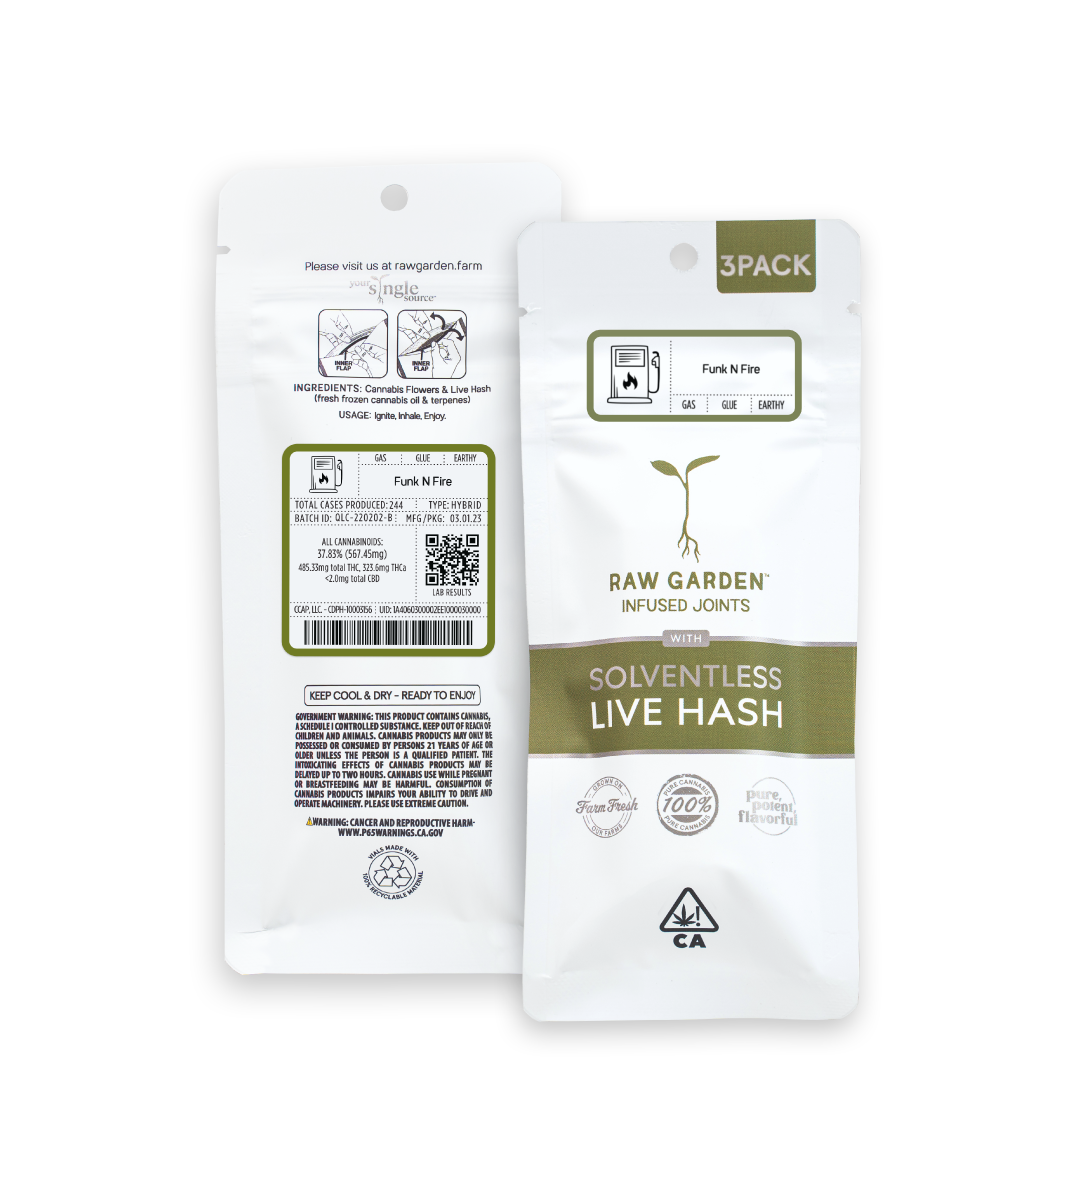 Raw Garden Solventless Live Hash Infused Joint 3pk